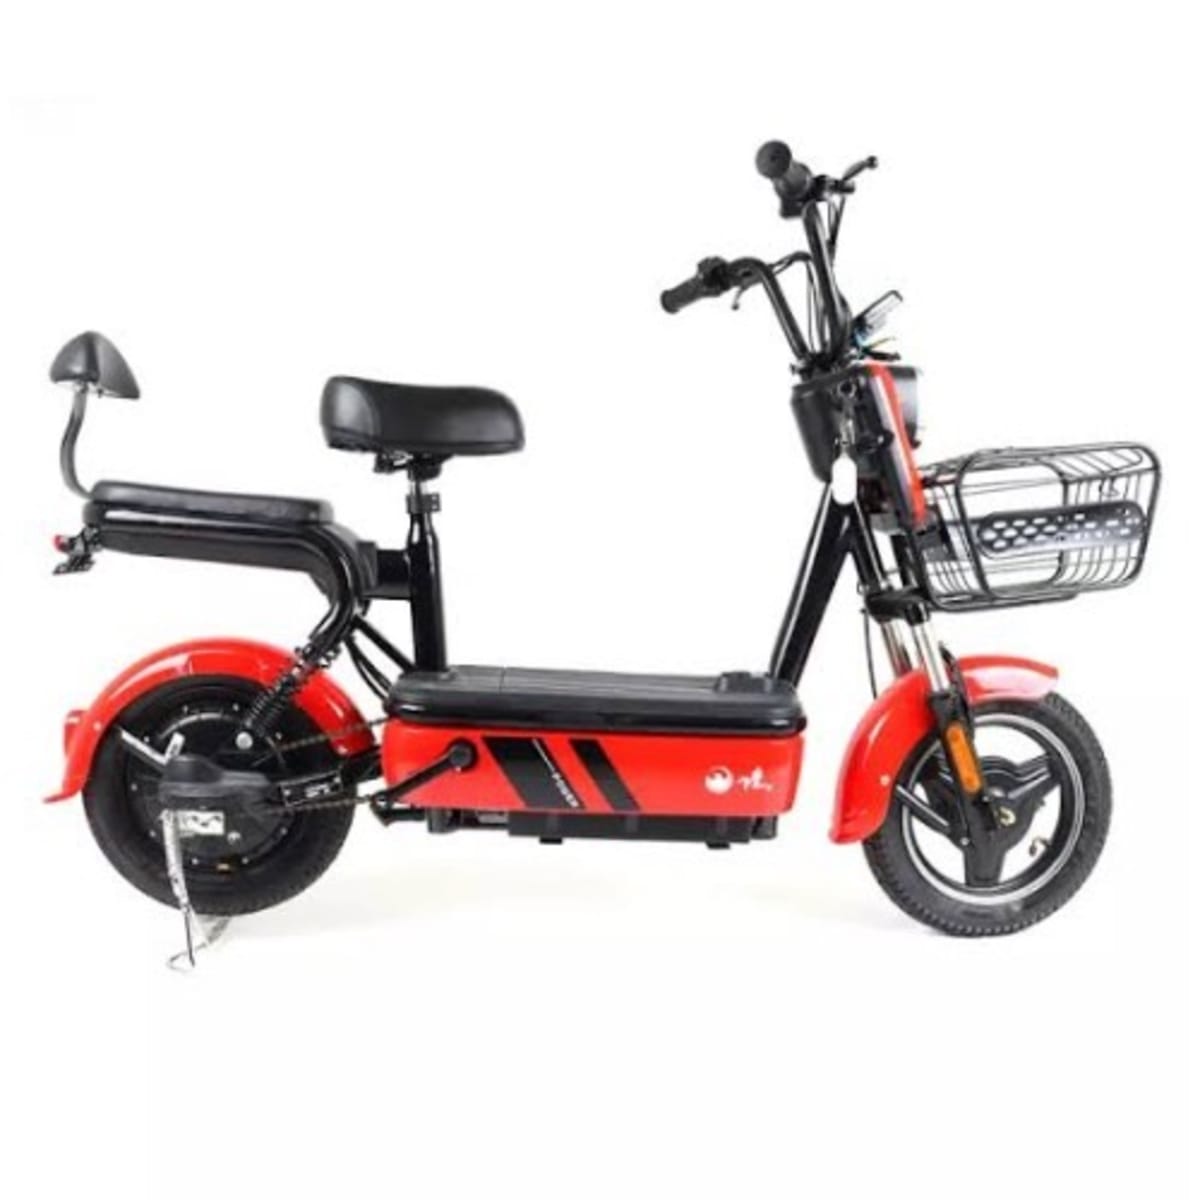 Electric & Rechargeable Battery Pedal Motorcycle Bike